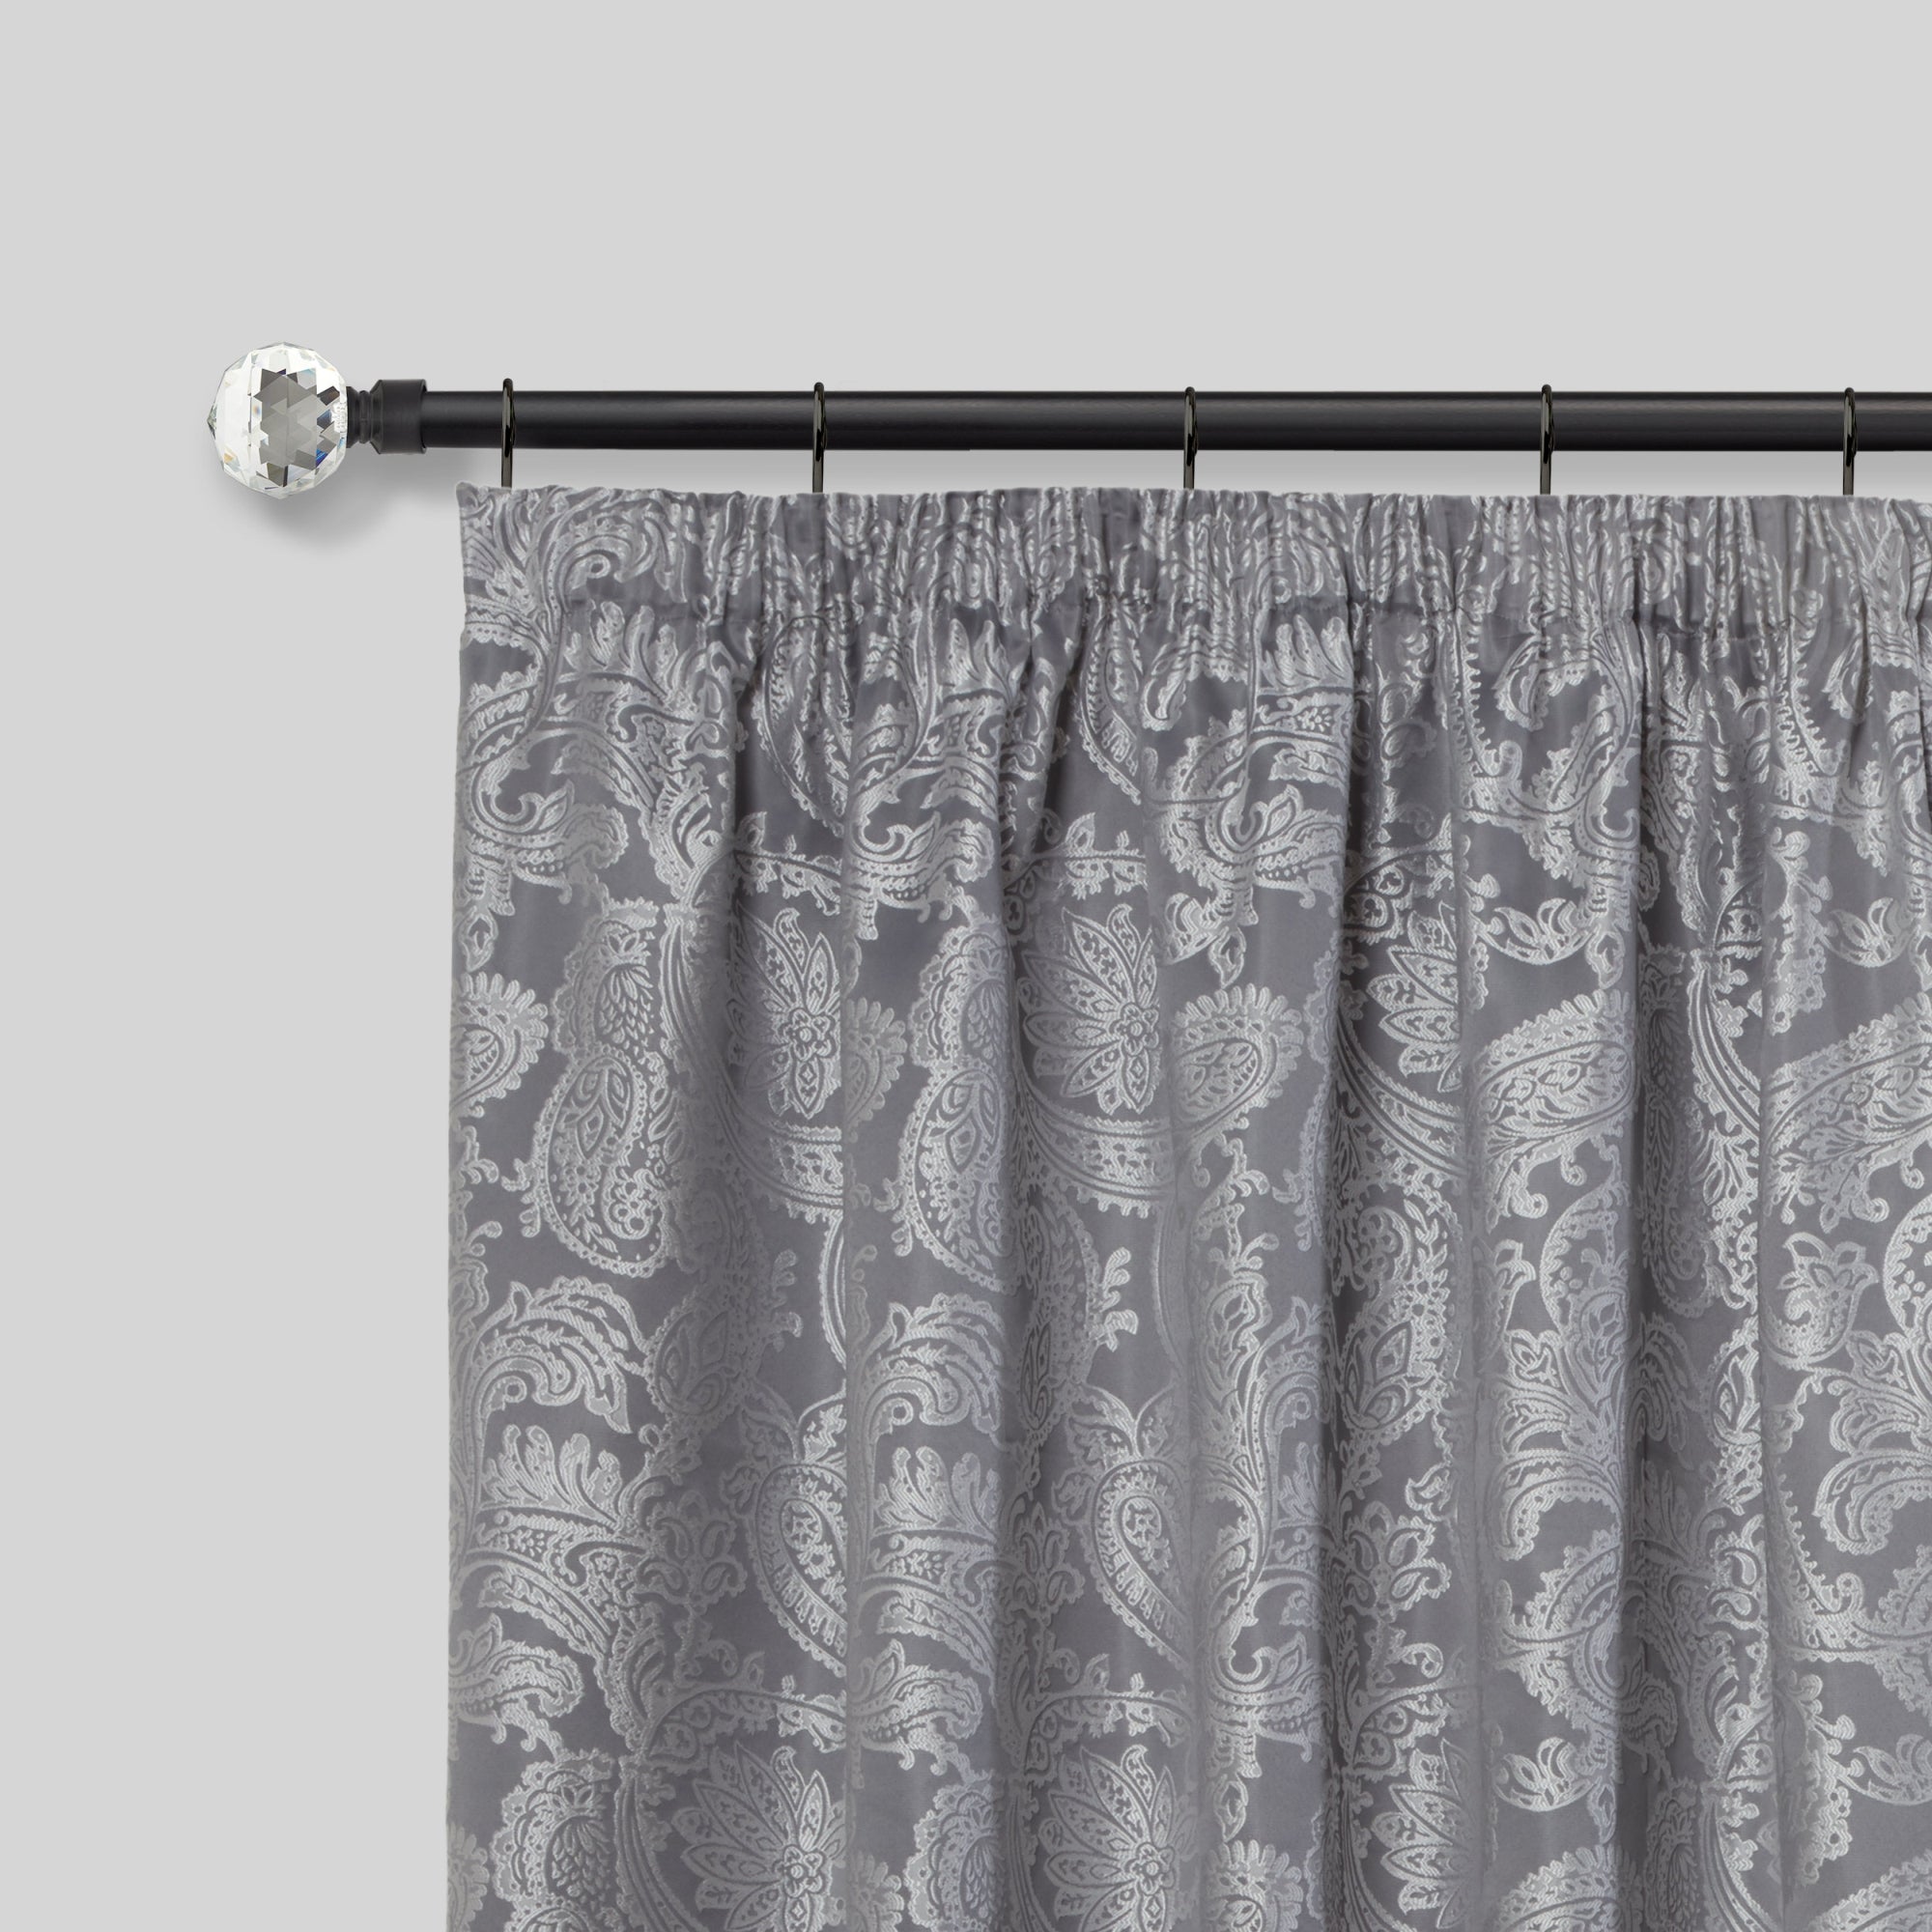 Crystal - Extendable Curtain Pole with Rings and Pair of End Finials in Matt Black - 1.6 - 3m